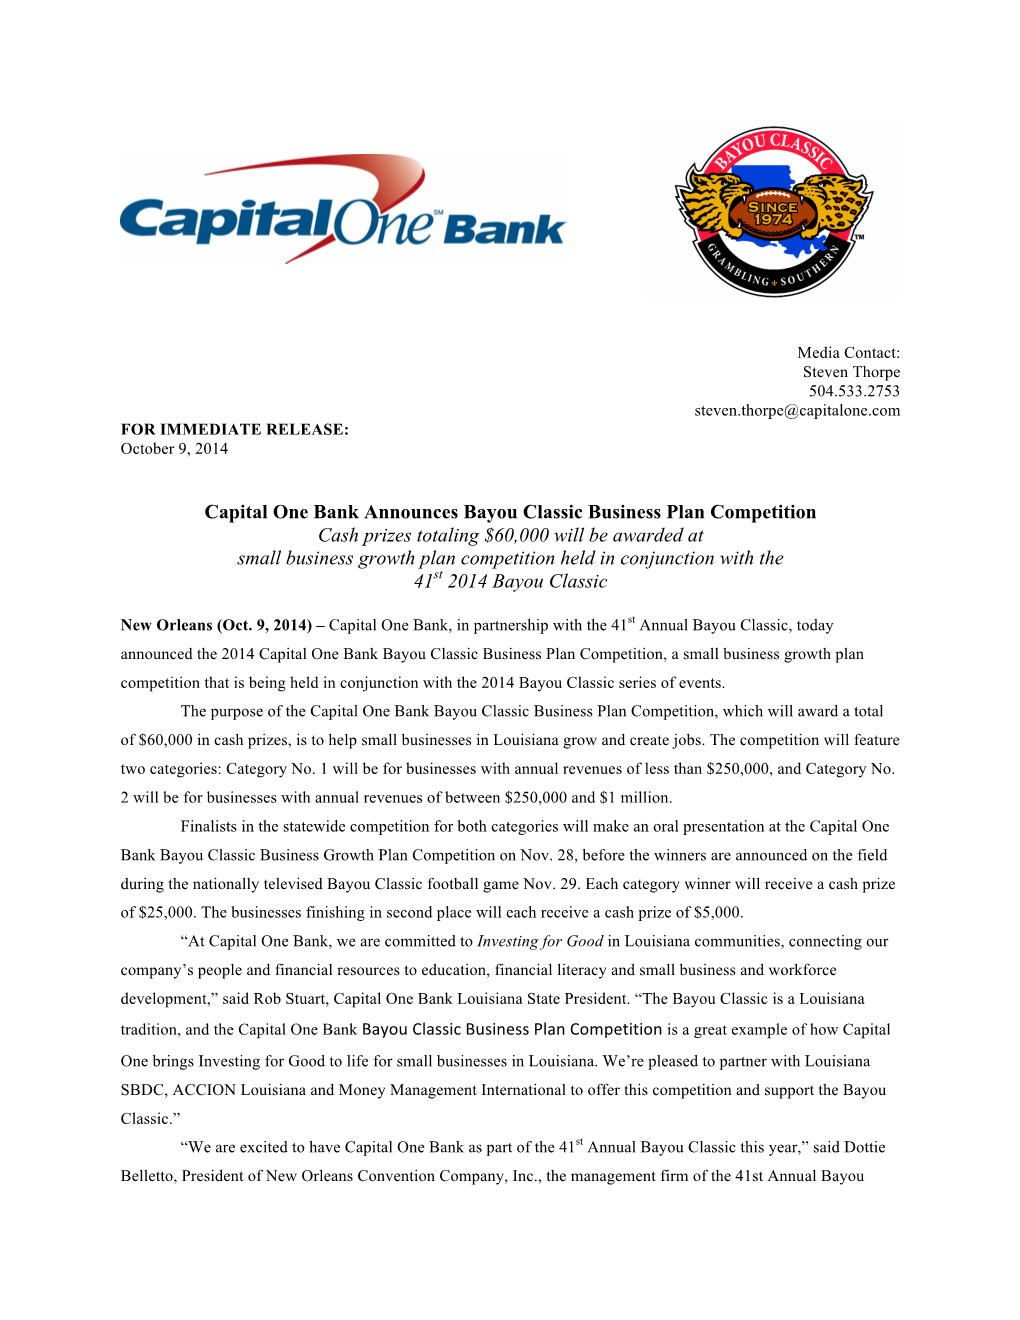 Capital One Bank Announces Bayou Classic Business Plan Competition